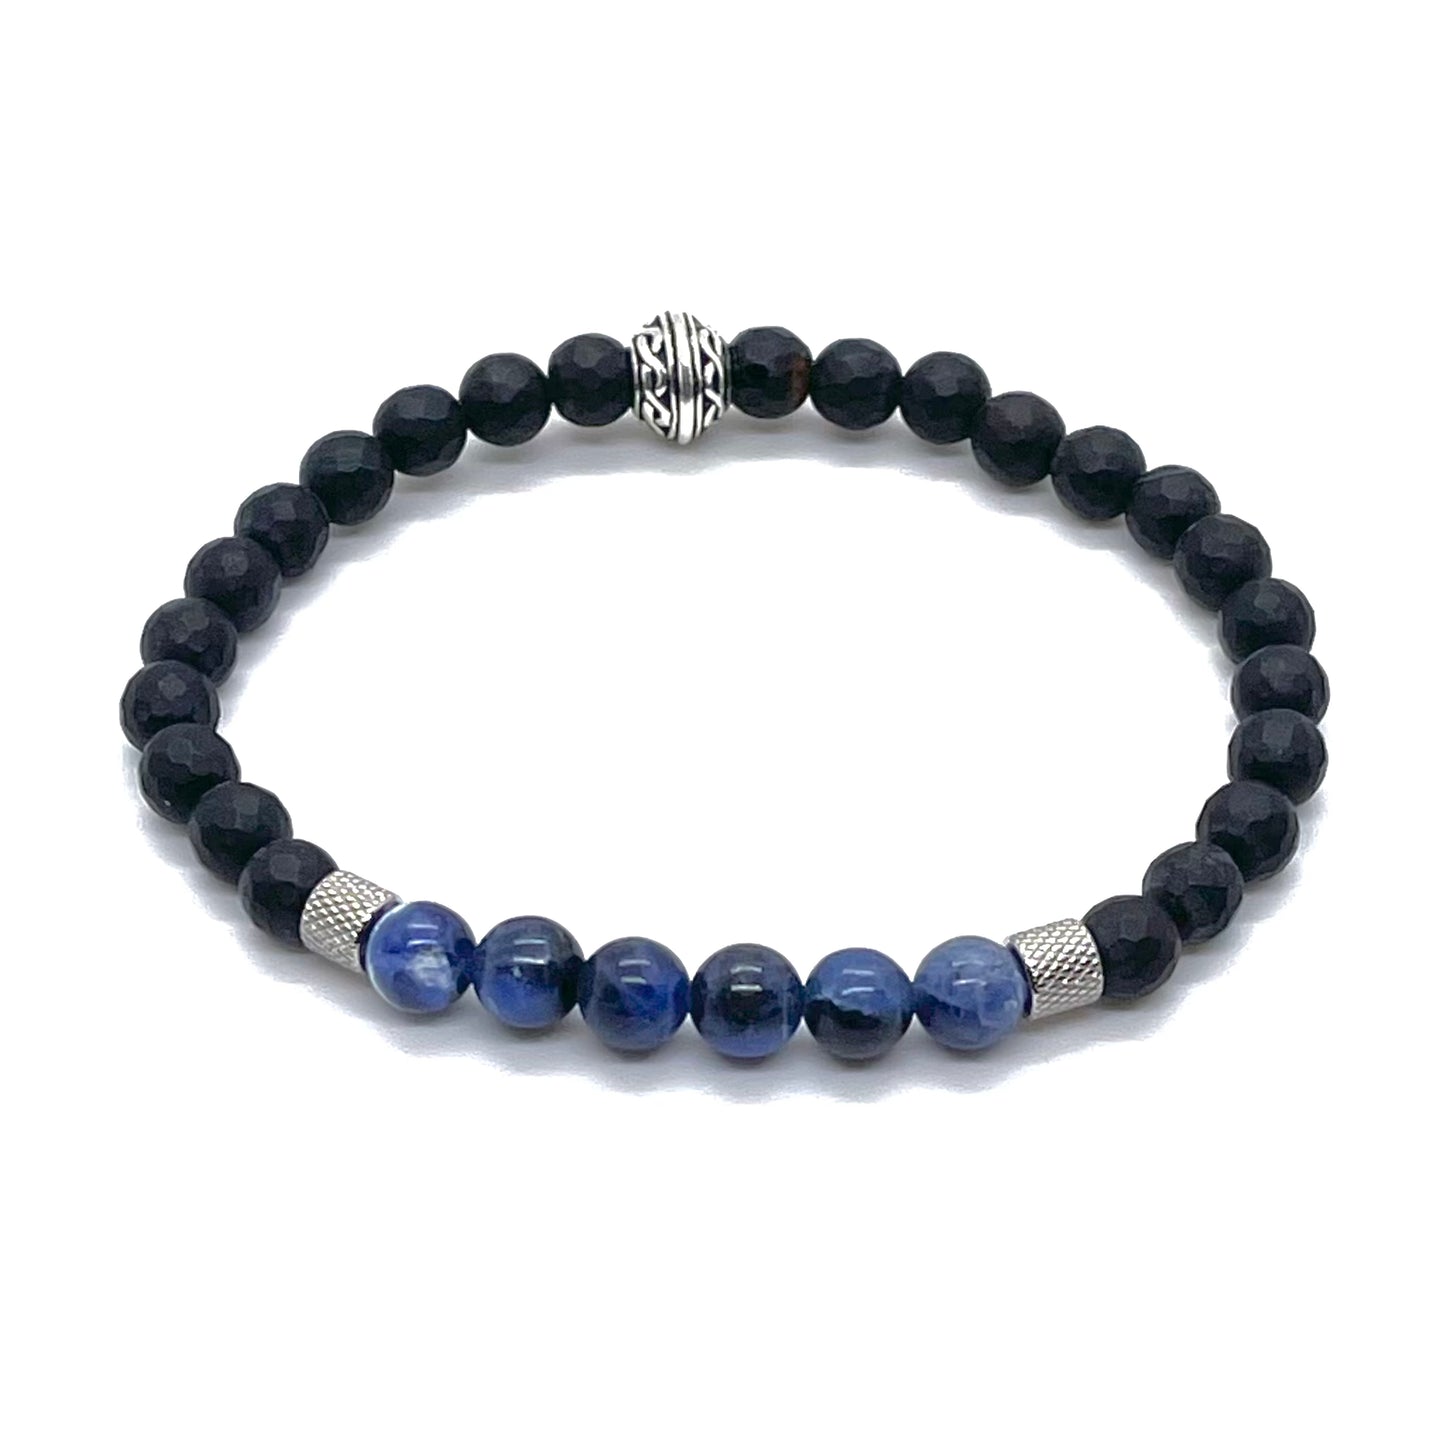 Mens onyx bracelet with blue sodalite gemstones and stainless steel and antique silver-plated accent beads on elastic stretch cord.